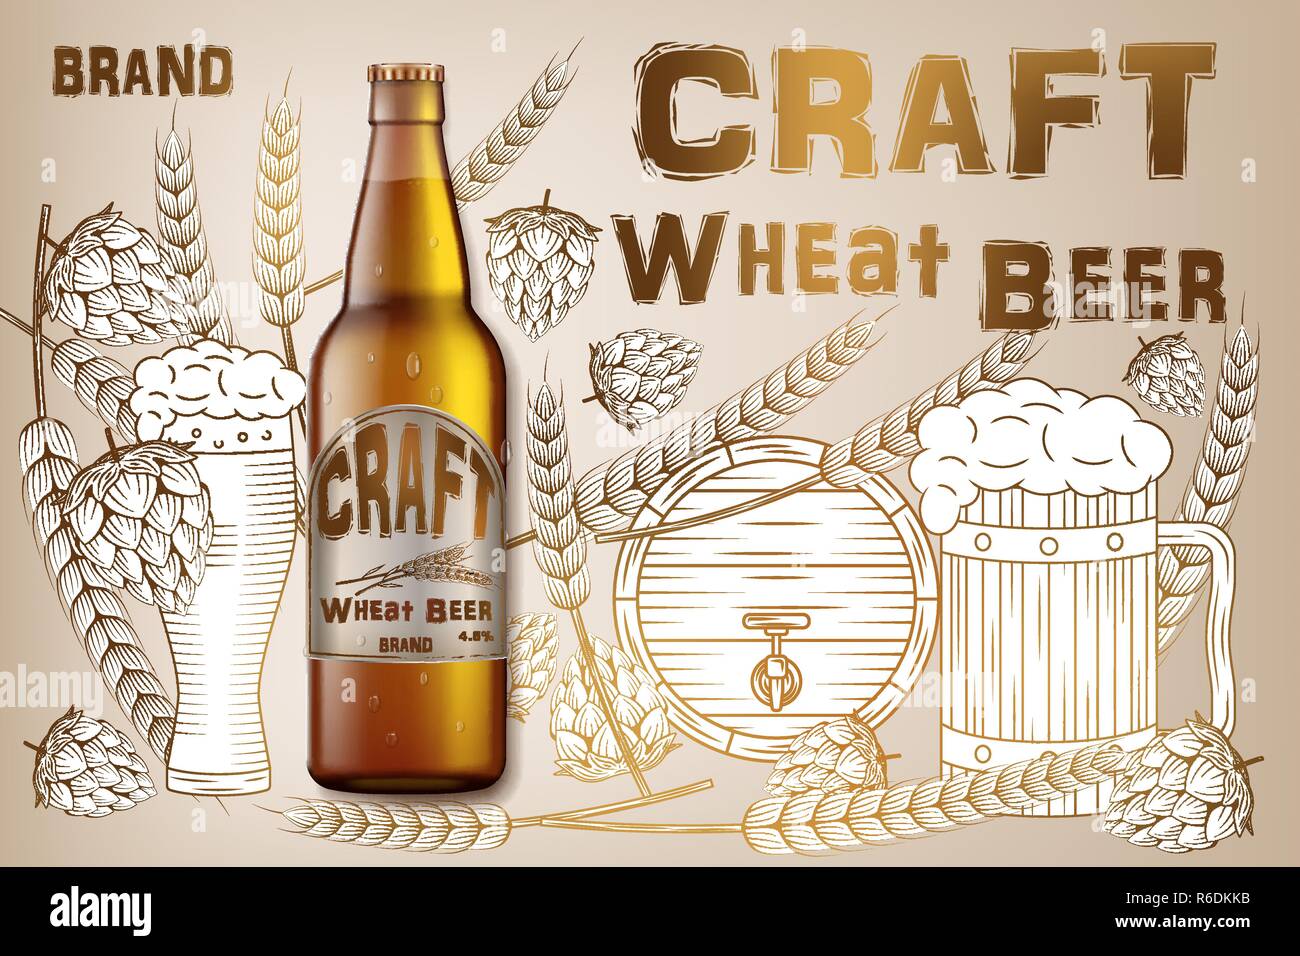 Craft wheat beer ads design. Realistic malt bottle beer isolated on retro background with ingredients wheats, hops and barrel. Vector 3d illustration Stock Vector